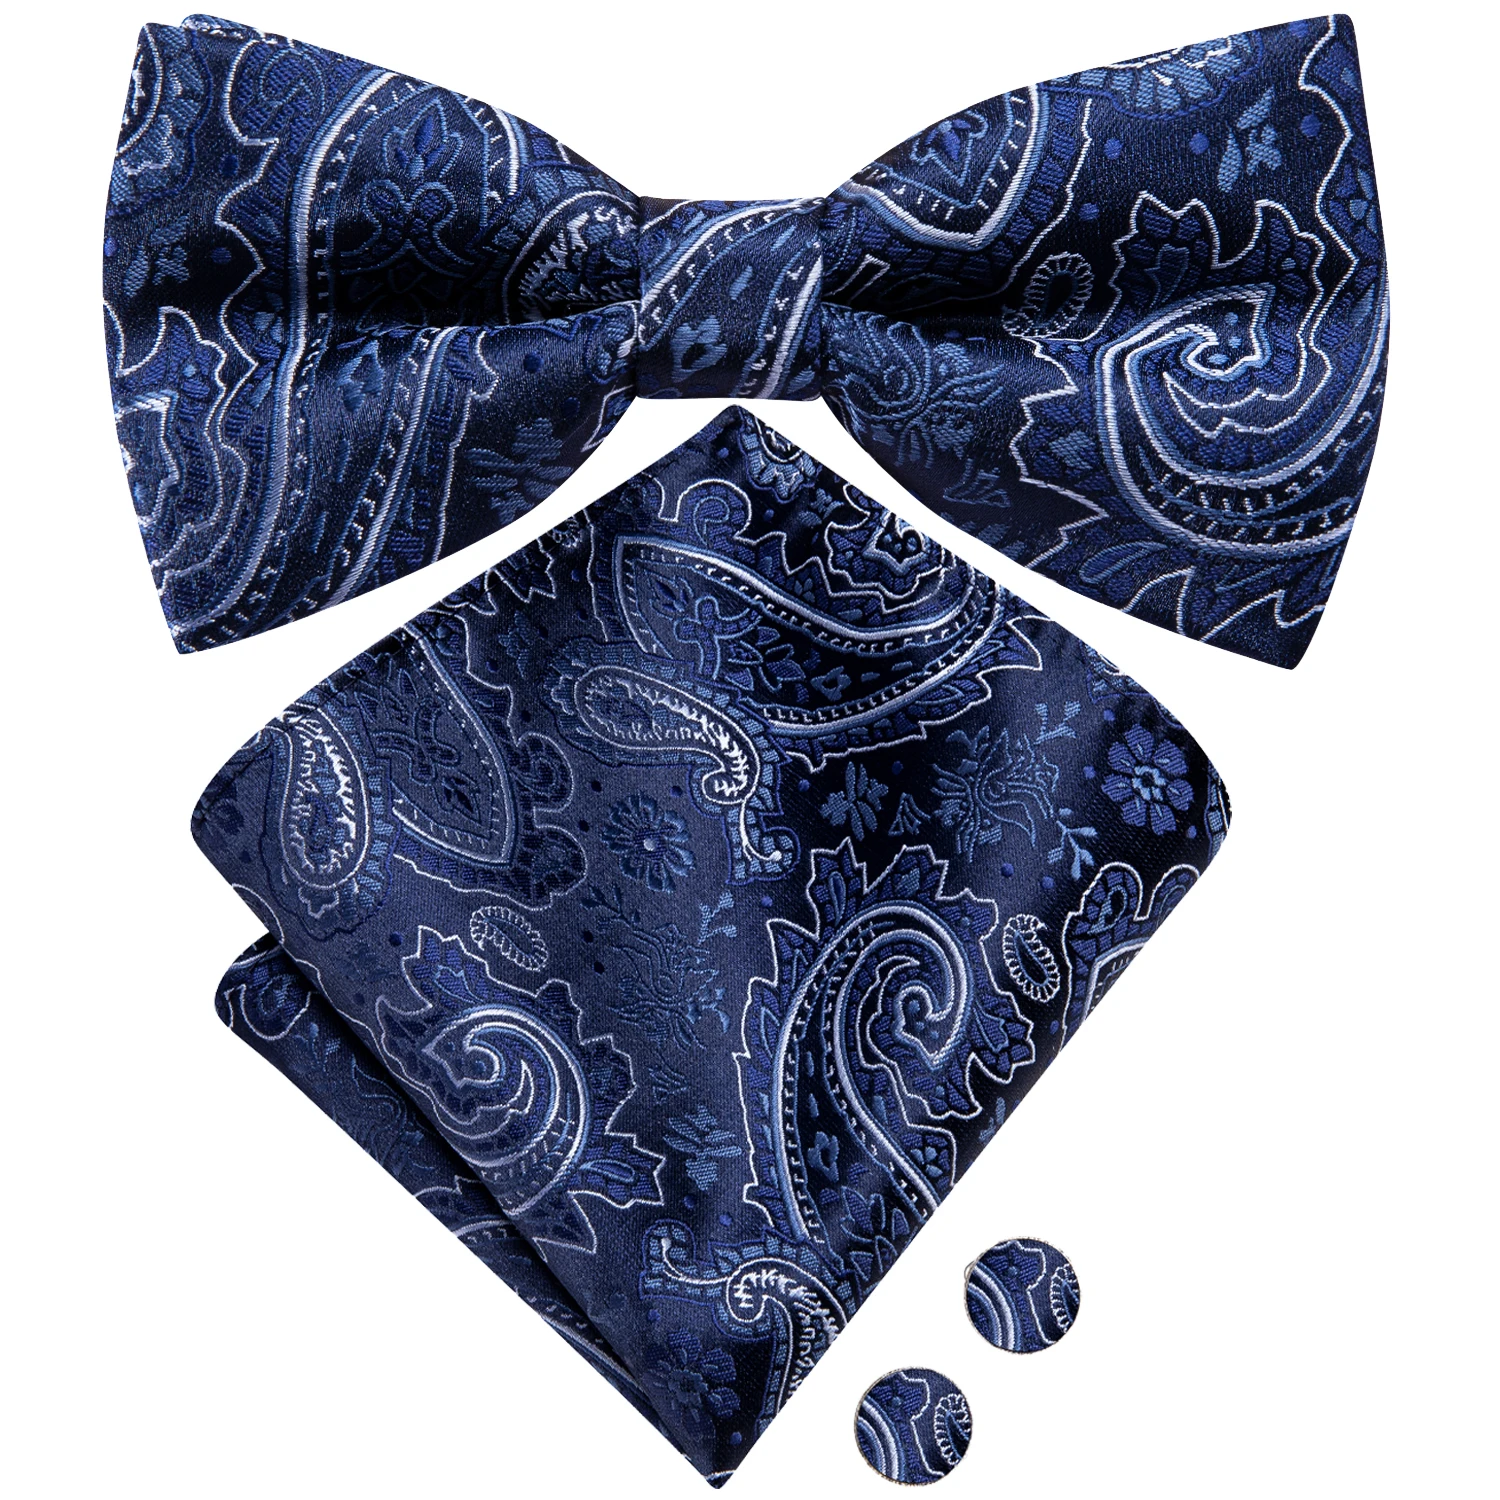 

Hi-Tie Navy Blue Mens Bow Tie Pocket Square Cufflinks Set Pre-tied Silk Butterfly Knot Bowtie for Male Wedding Business Party